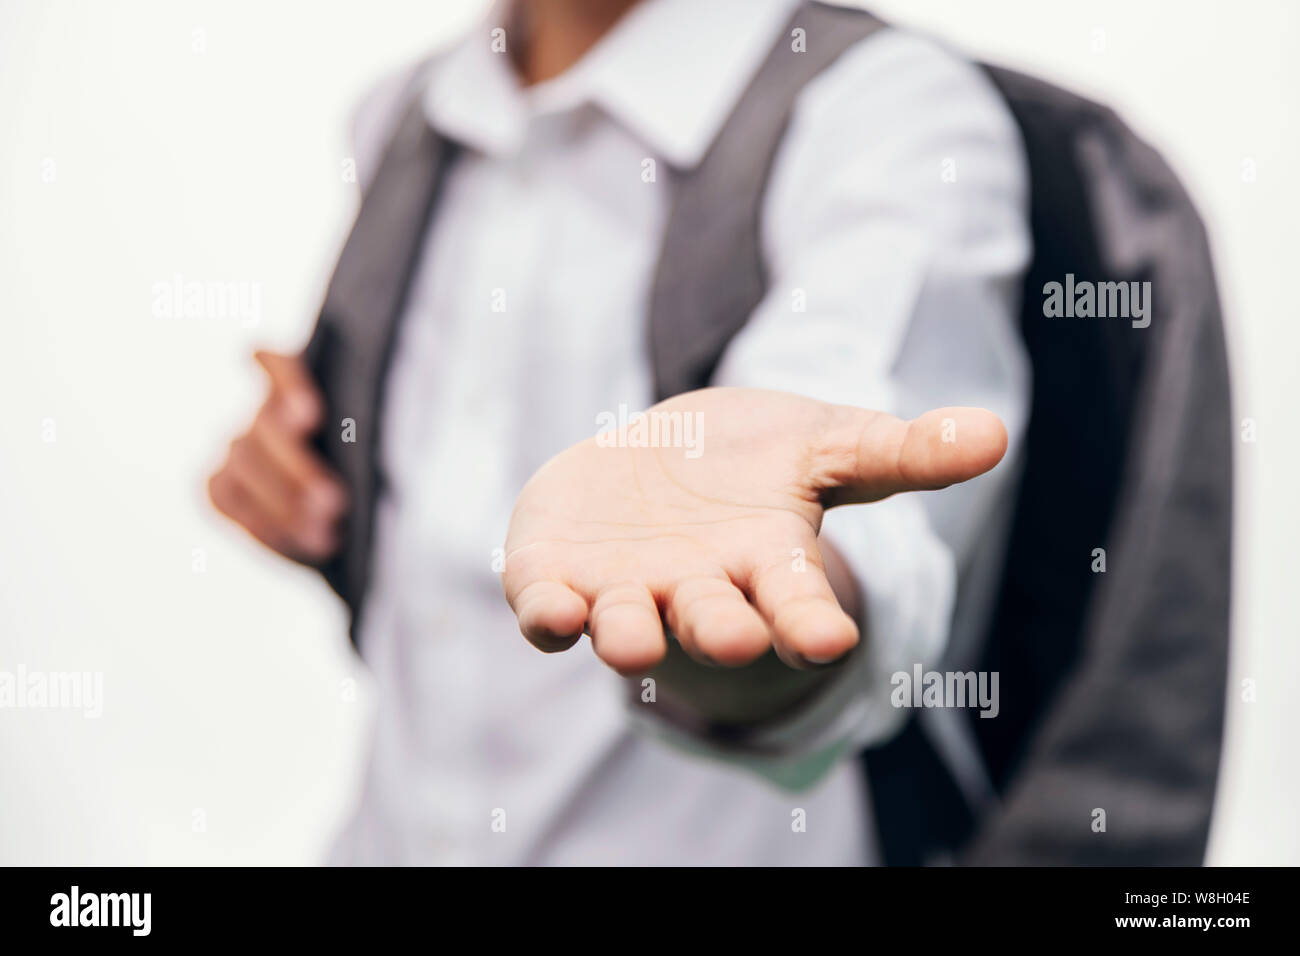 Schoolboy with backpack stretching hand with an opened palm Stock Photo